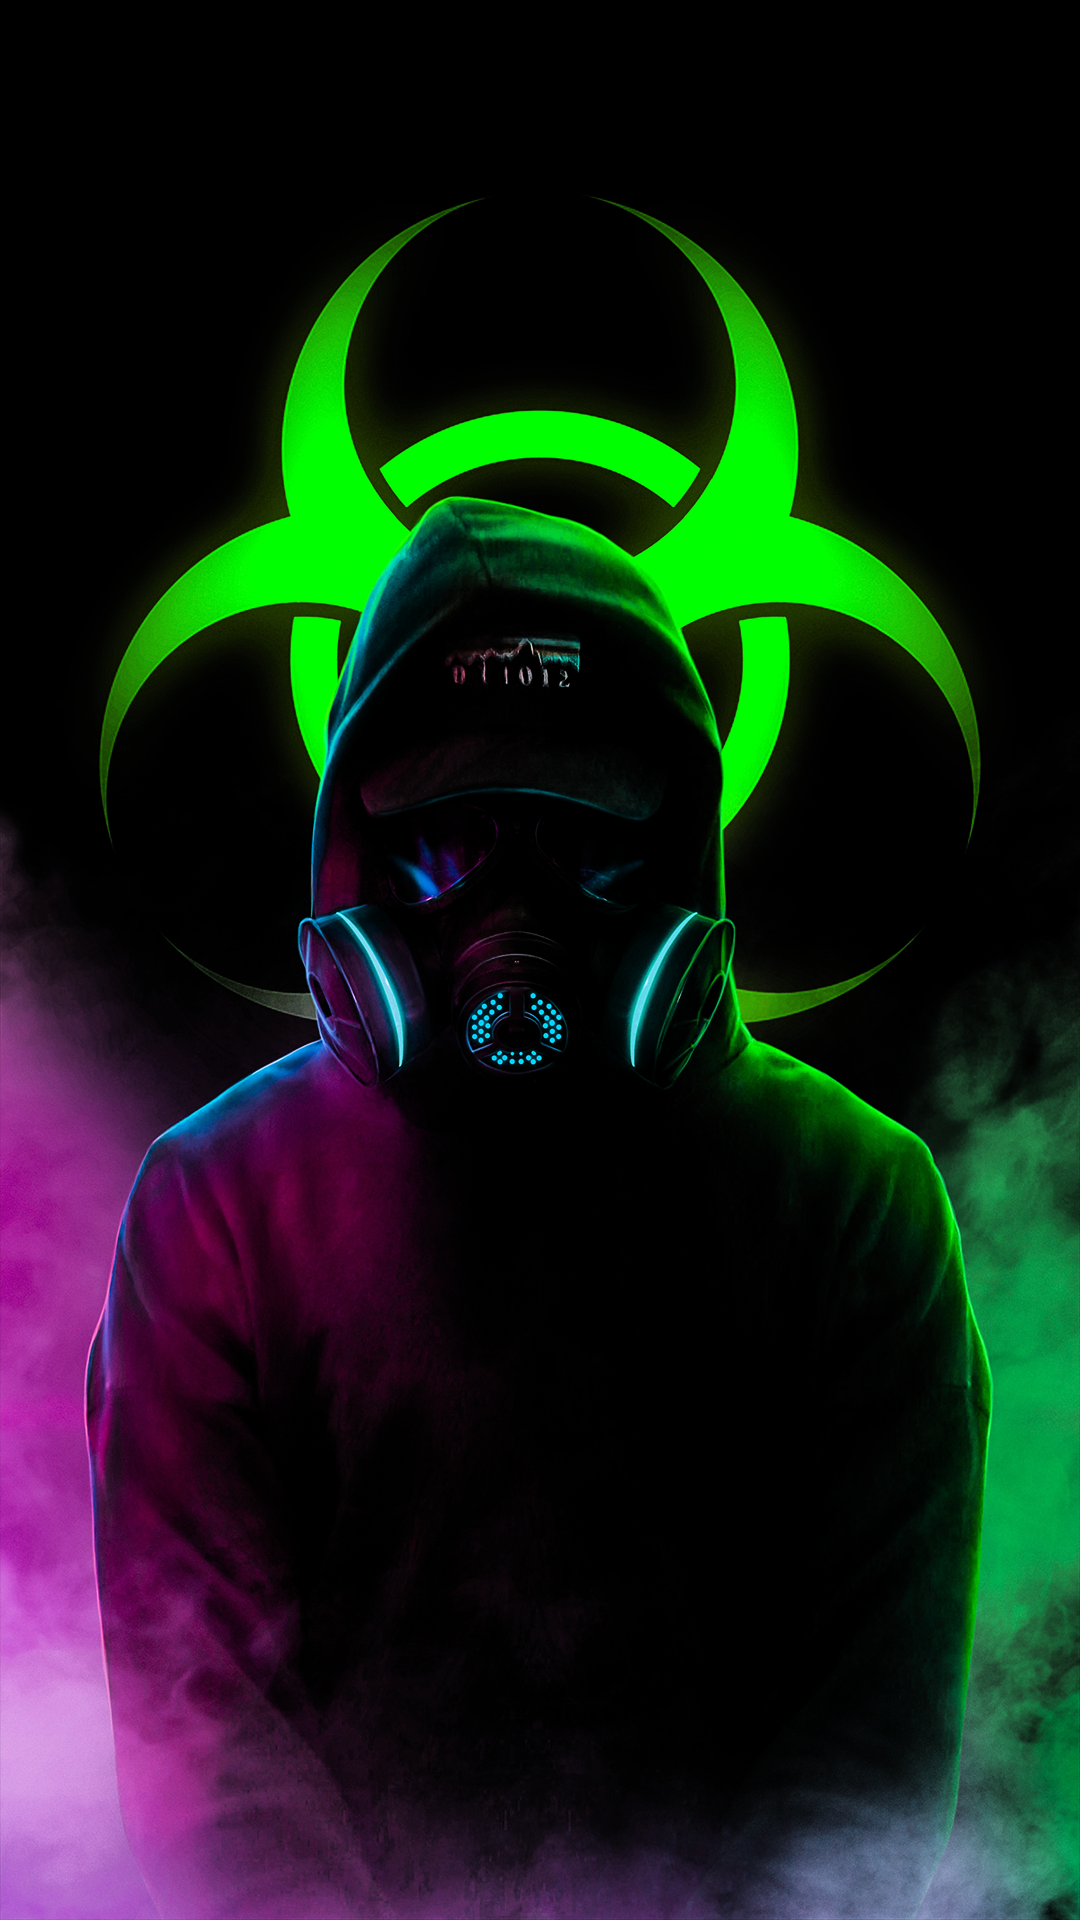 Wallpaper Neon, The Mask, Amoled, Cruel Free Fire, Mask, Background -  Download Free Image